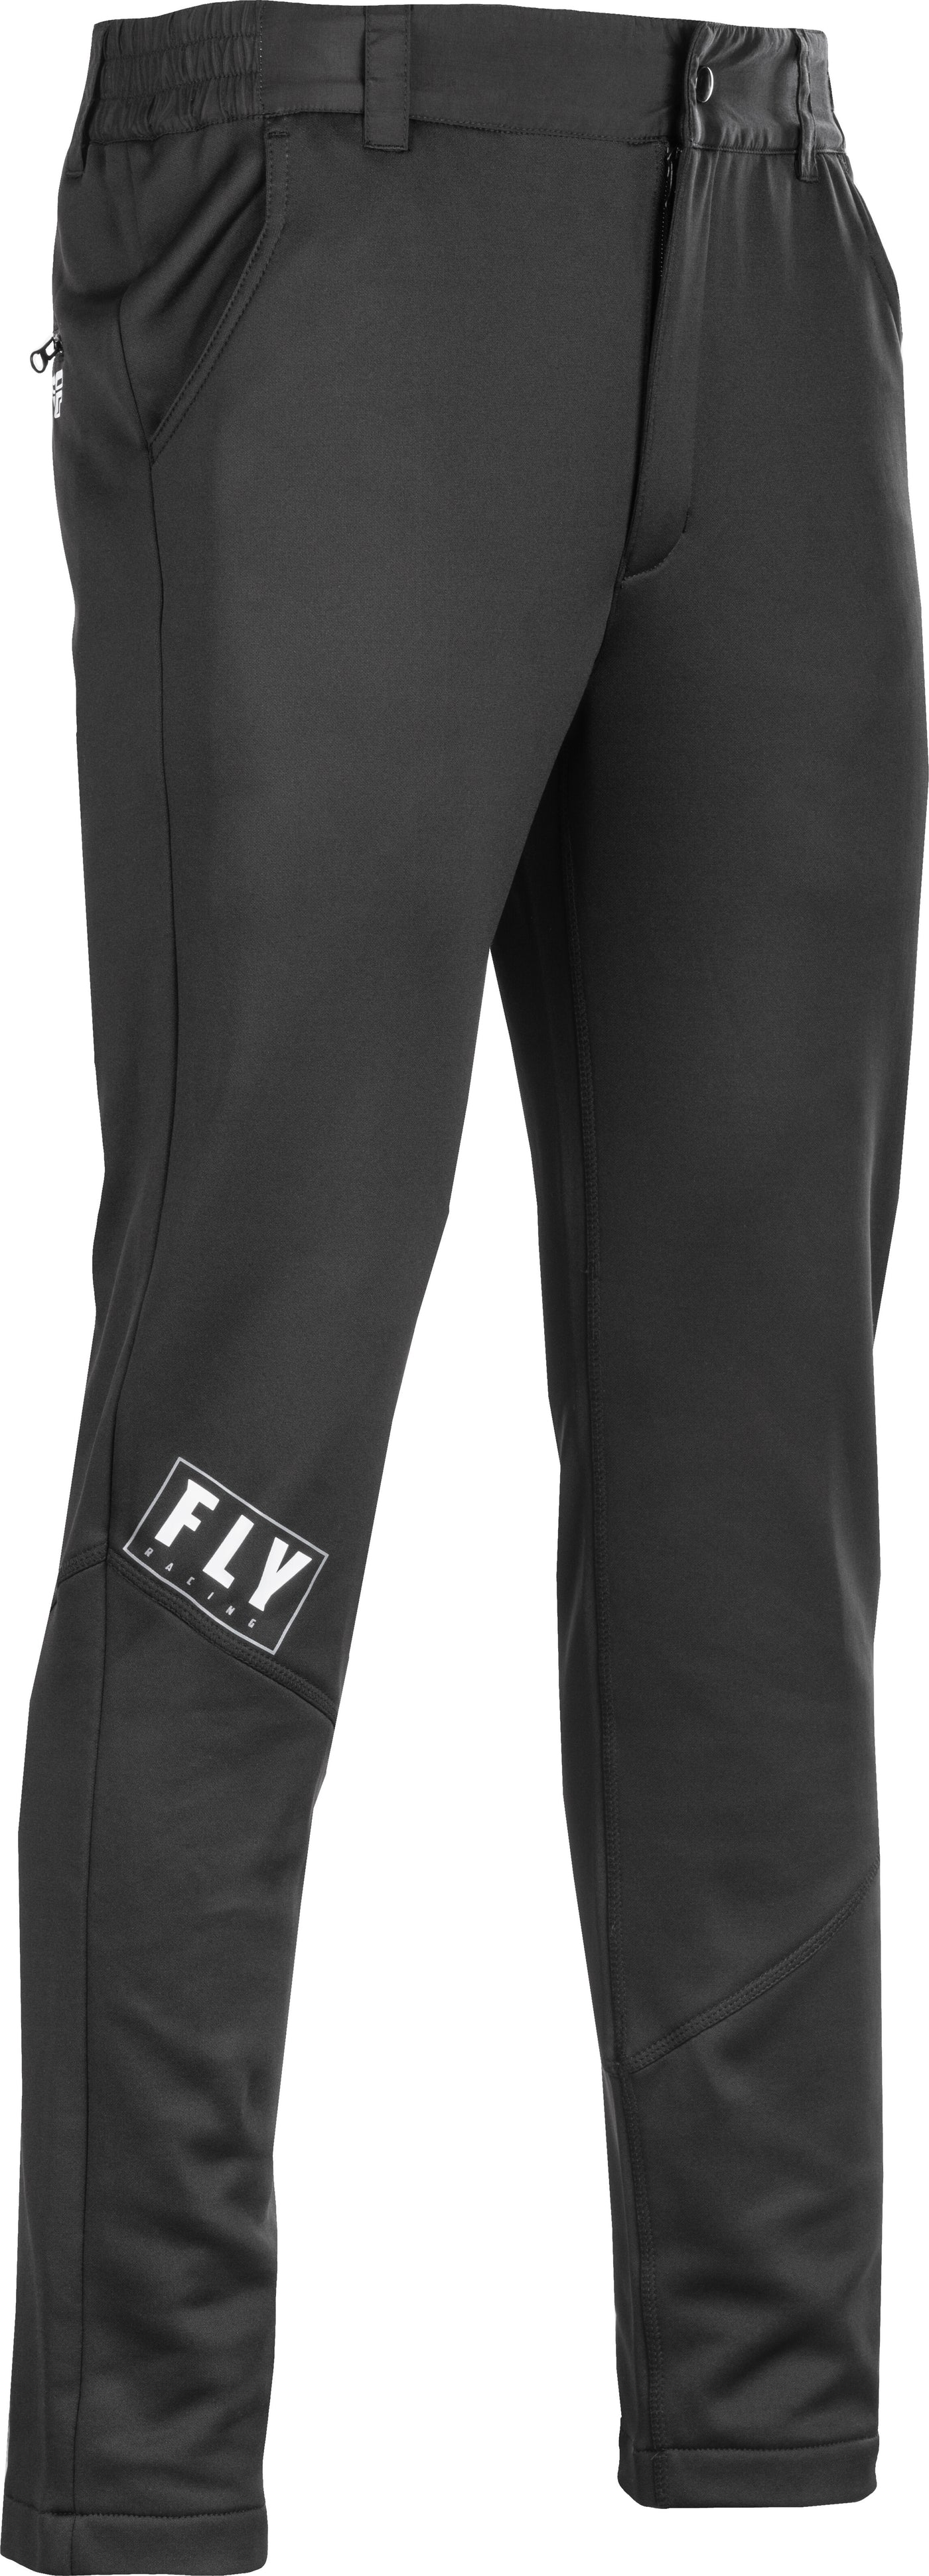 FLY Mid-Layer Pants